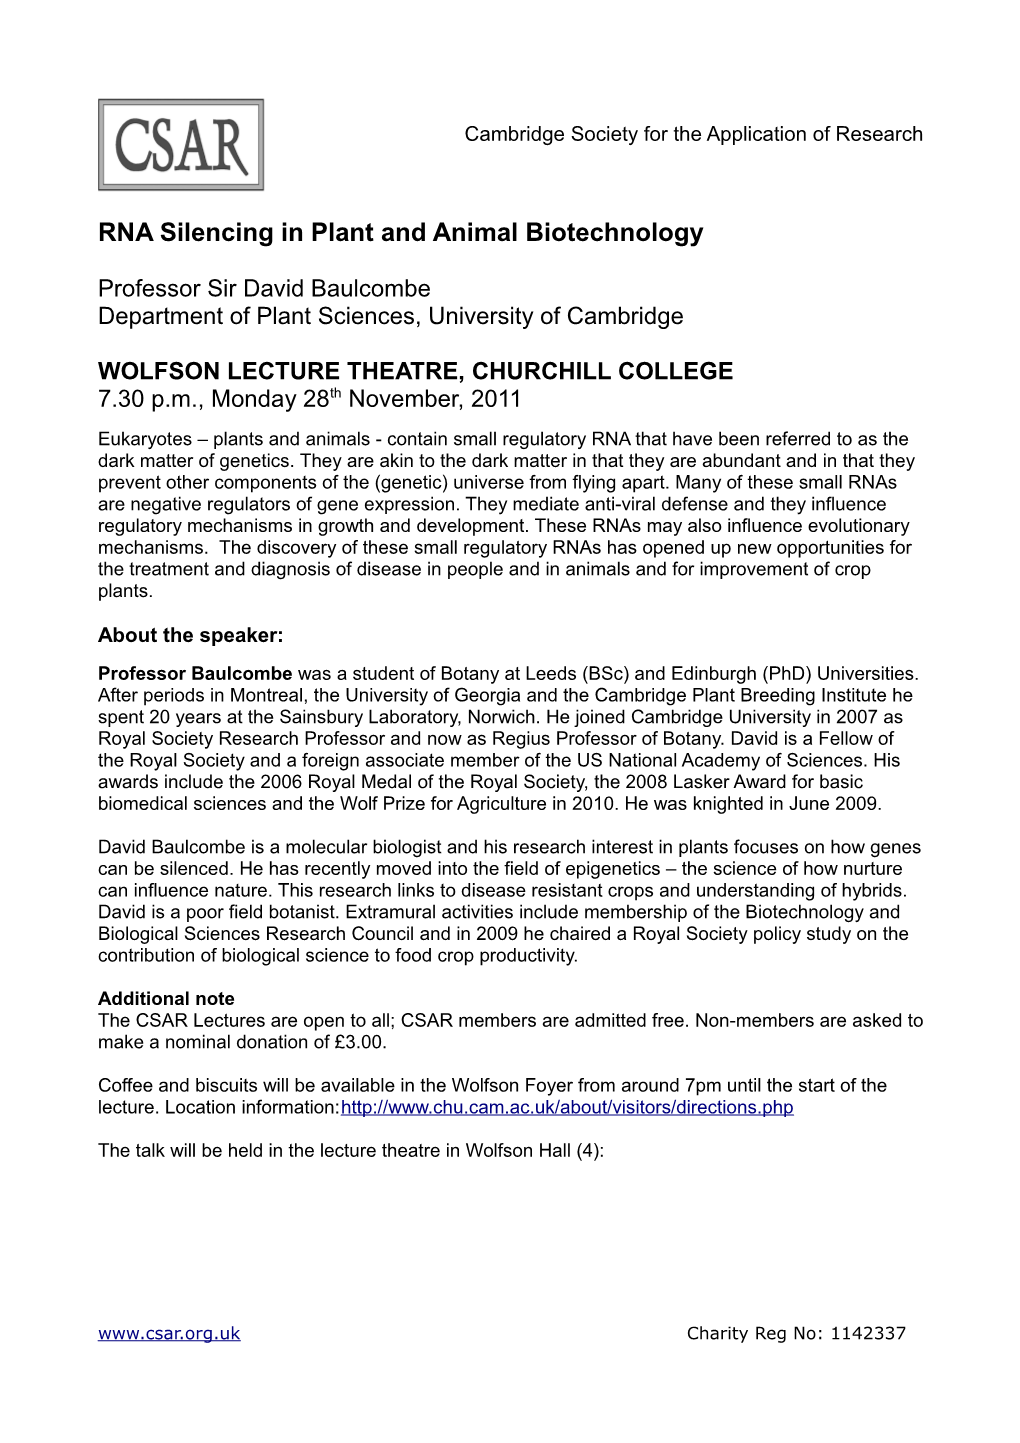 RNA Silencing in Plant and Animal Biotechnology